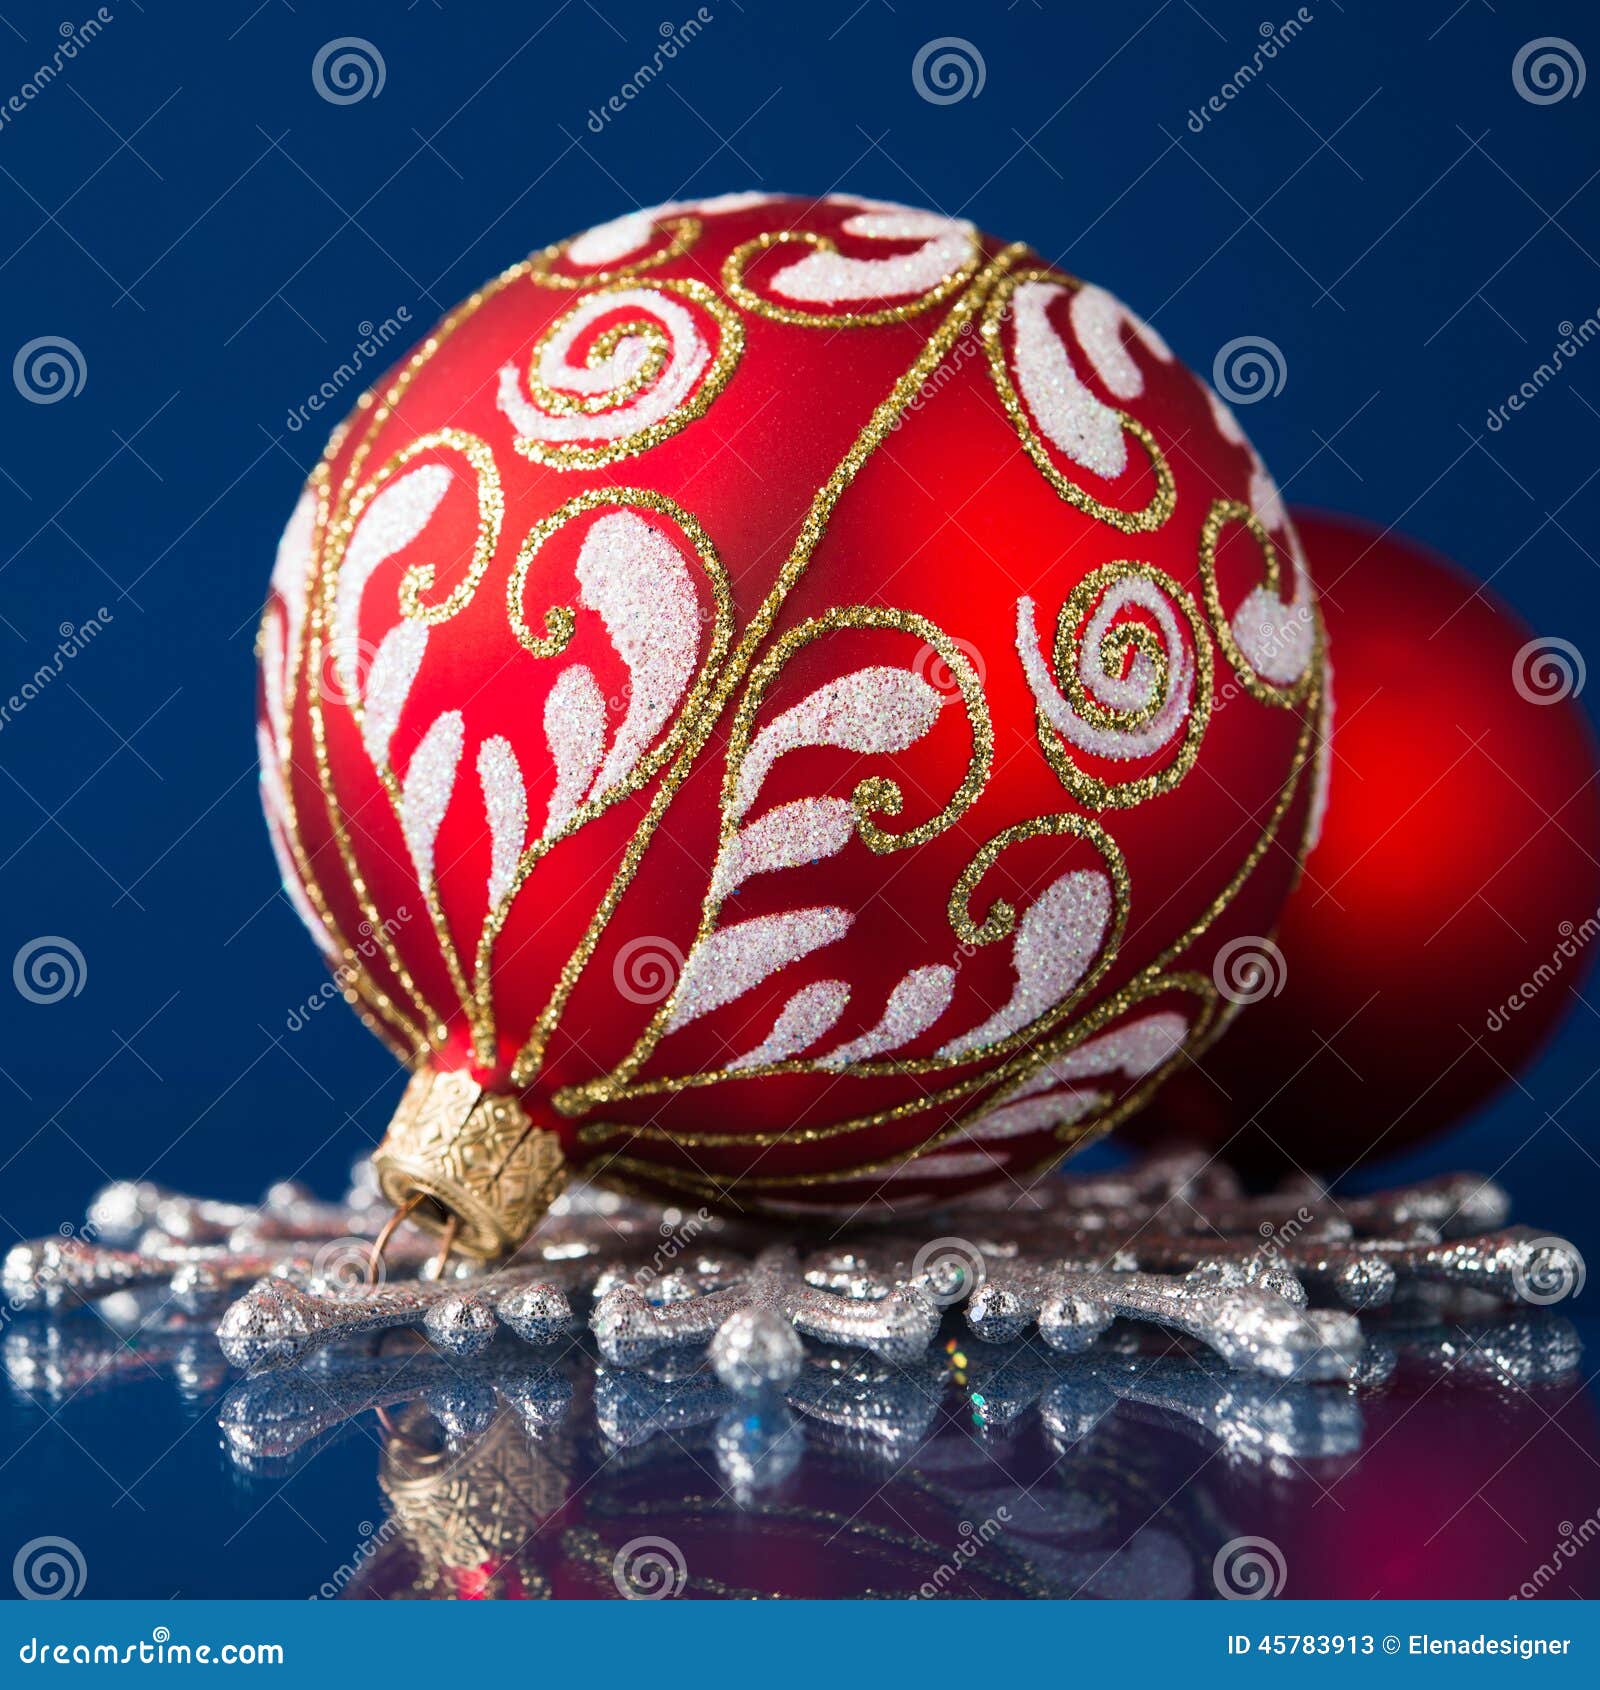 Red and Silver Christmas Ornaments on Dark Blue Background Stock Image ...